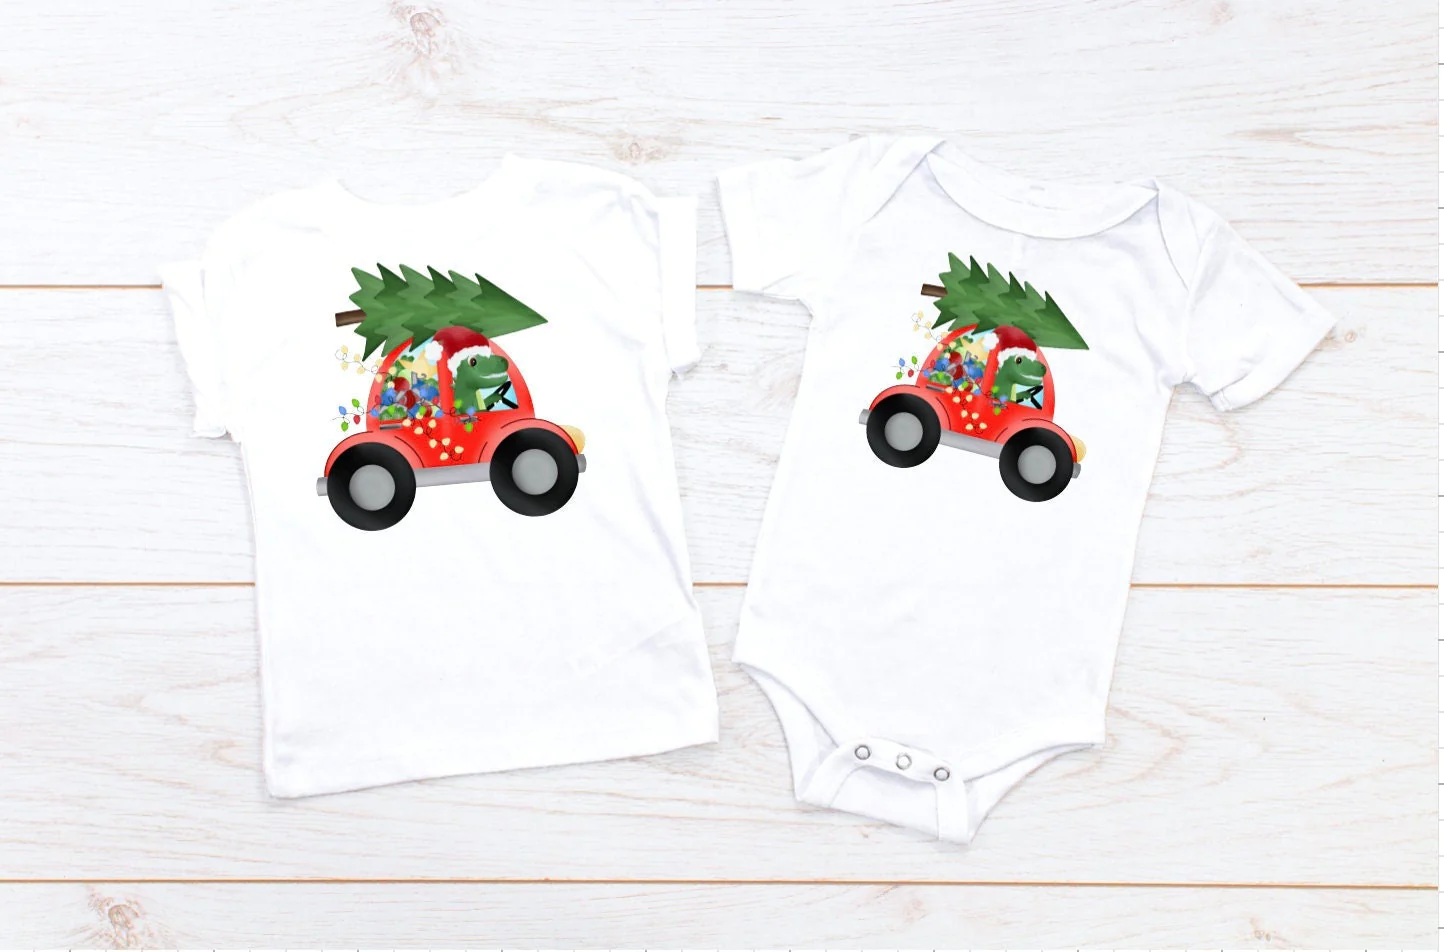 Short-sleeved matching Christmas outfits for kids featuring dino graphics.